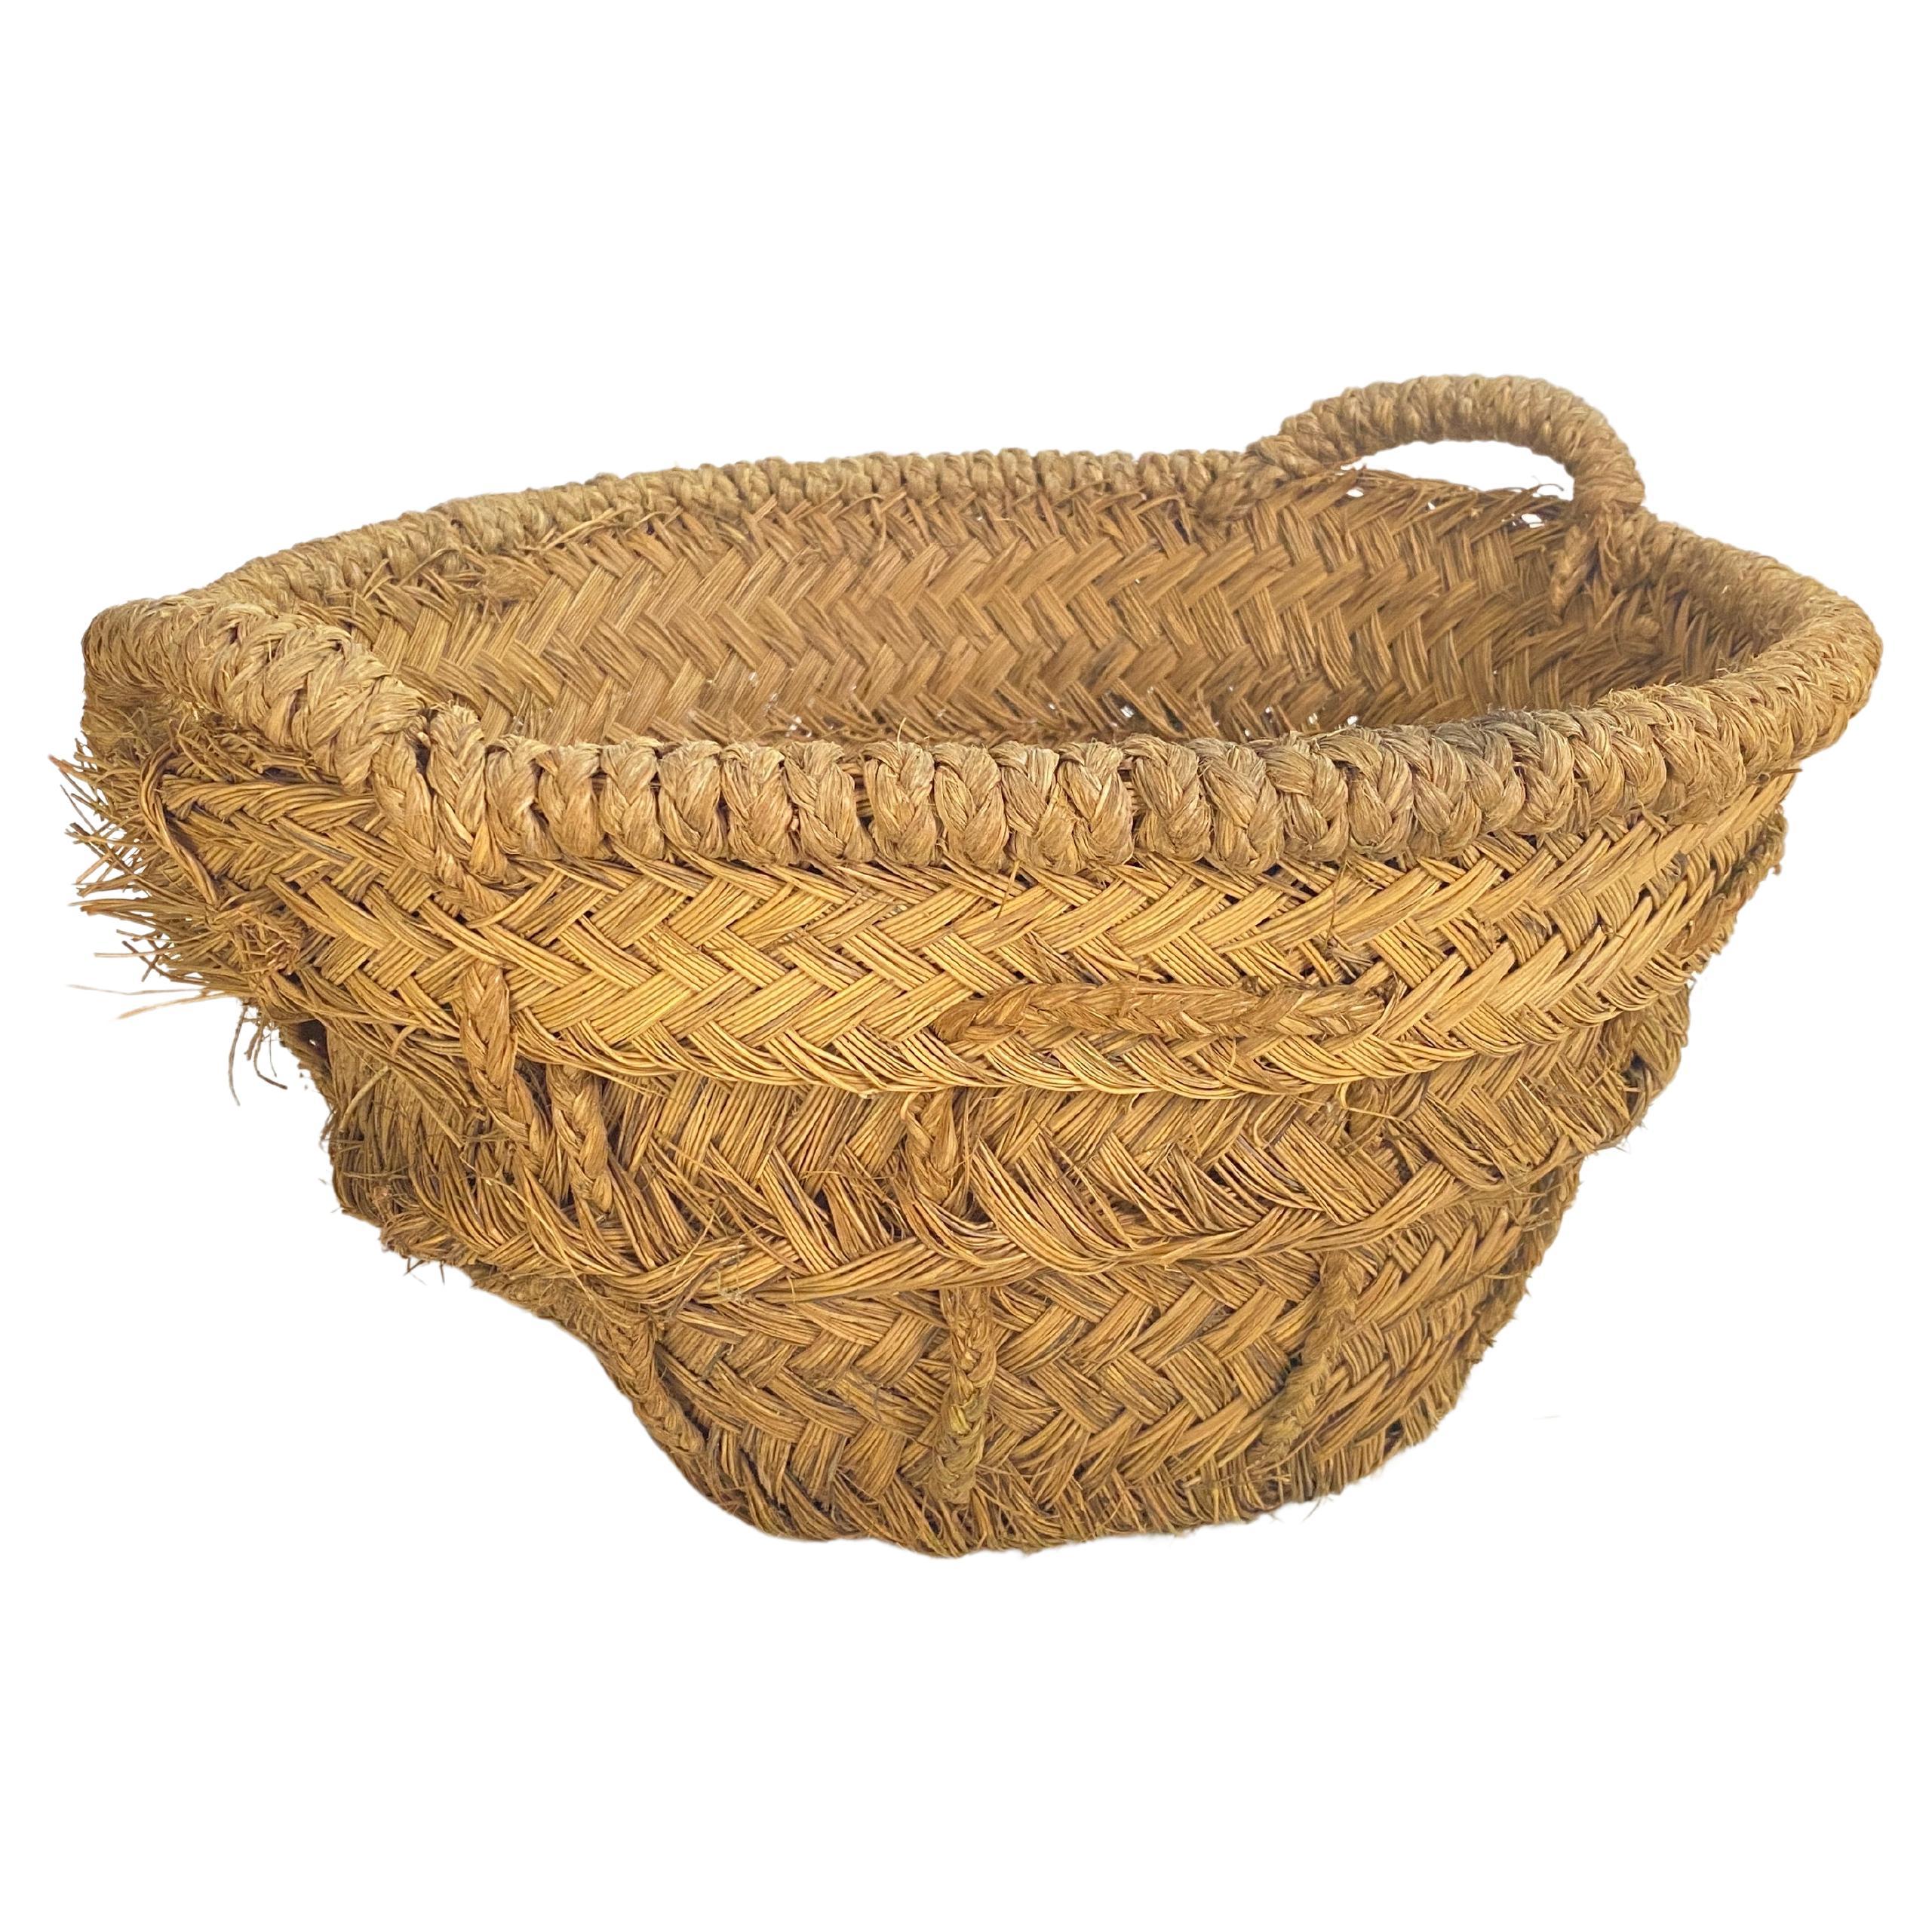  Basket in Rattan Rond Form Italy, Brown Color 1970